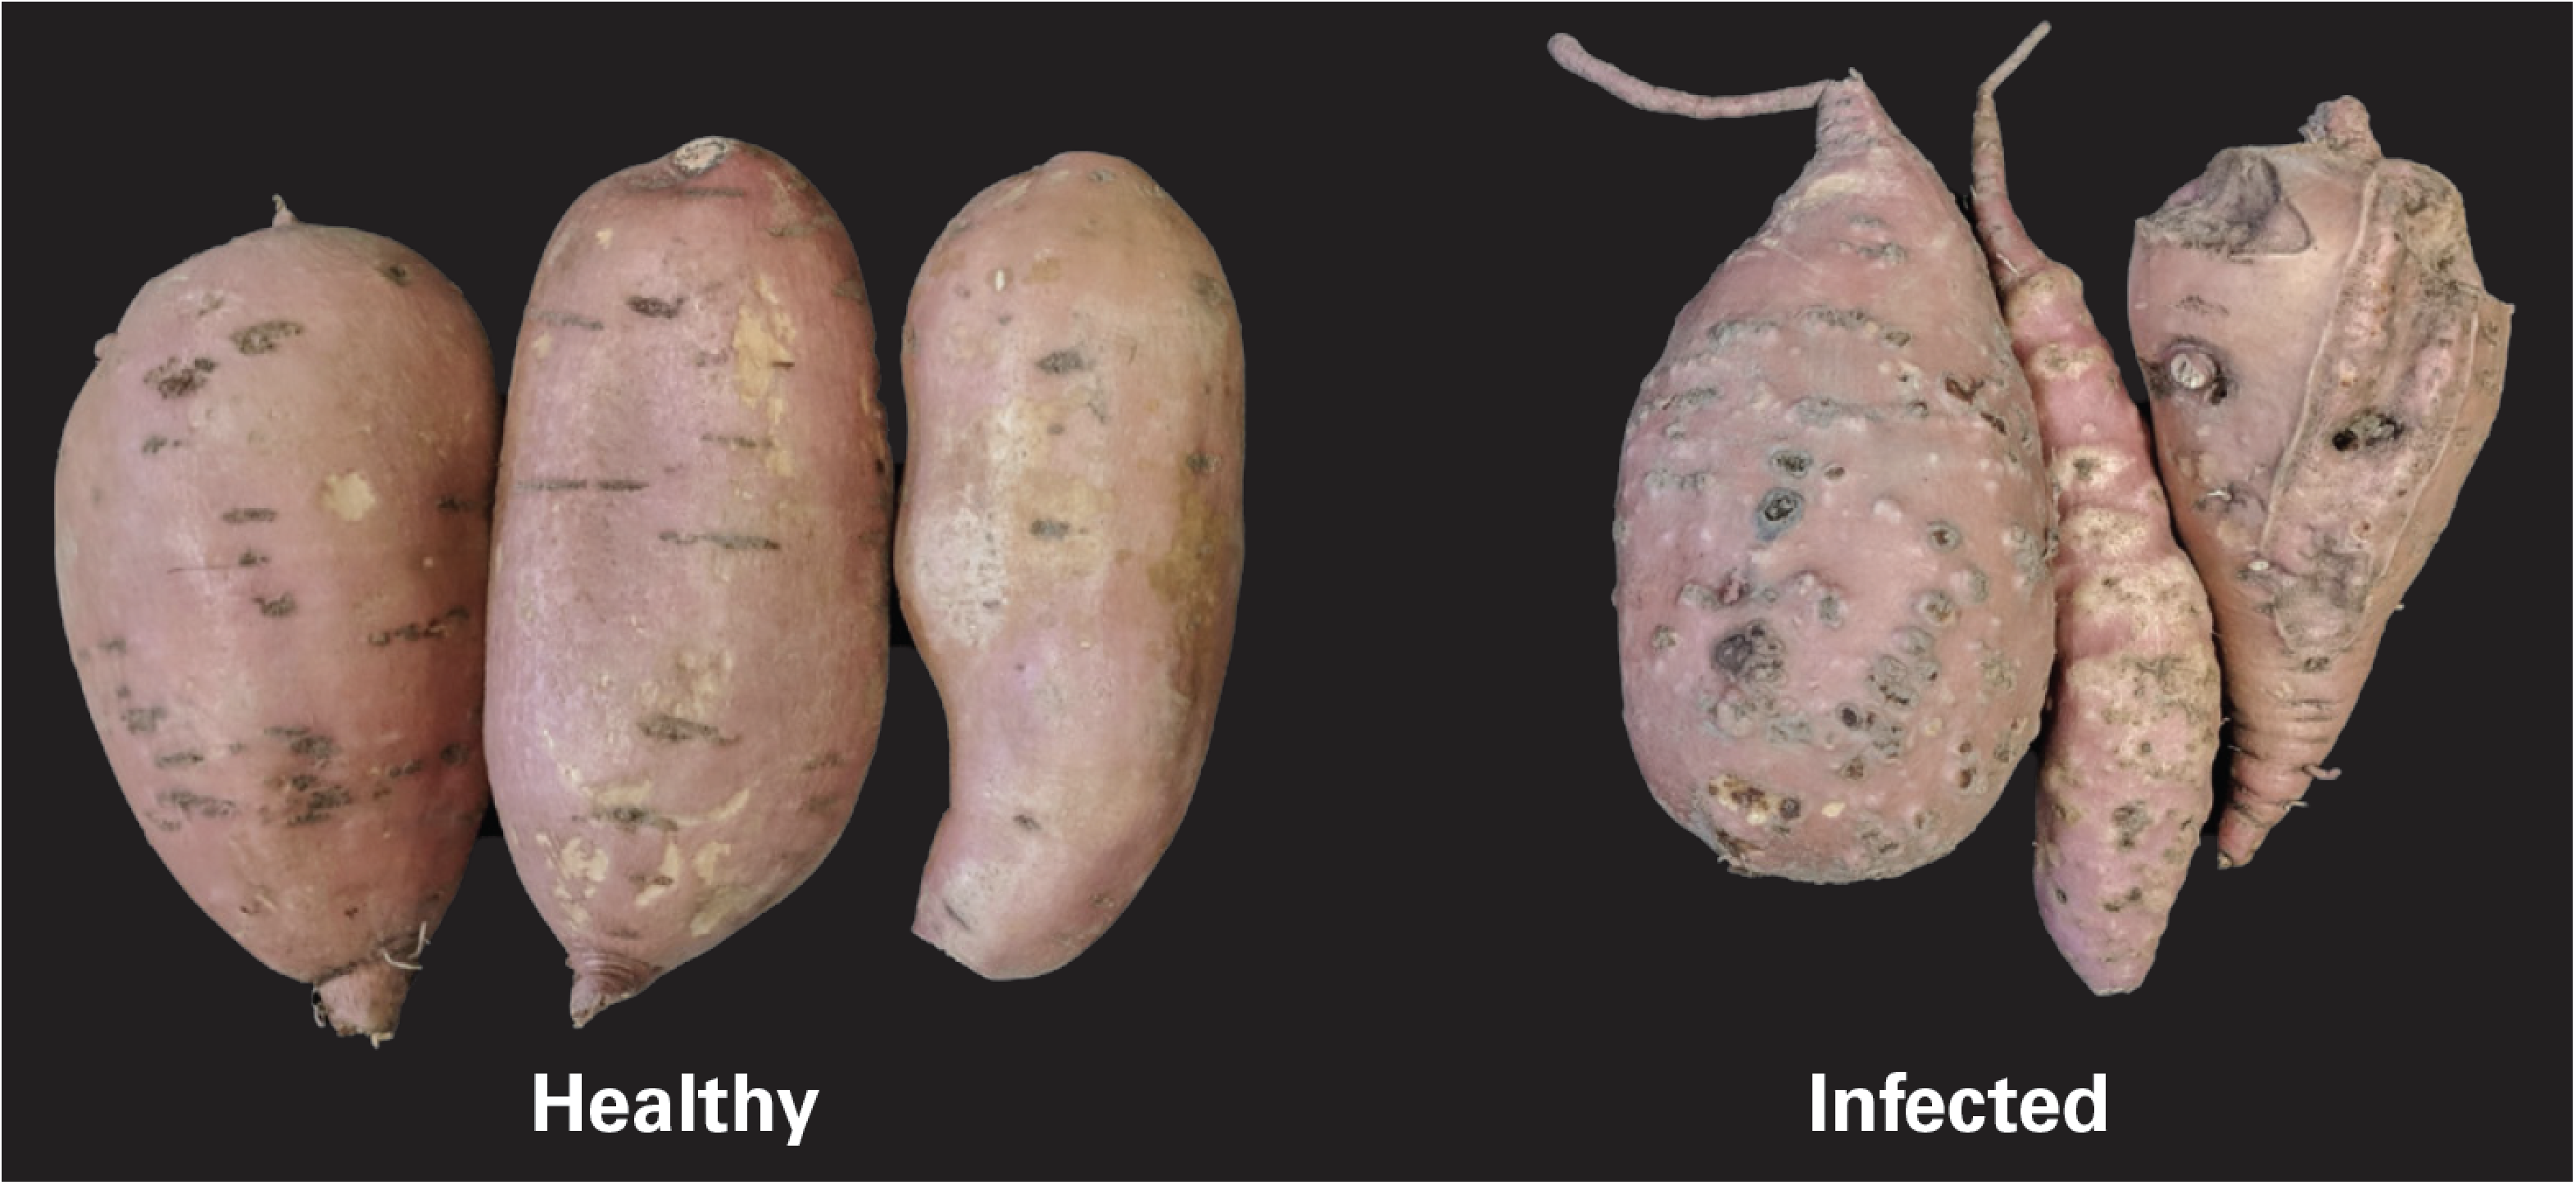 Side-by-side comparison showing non-infected sweet potatoes versus sweet potatoes infected with Guava Root Knot Nematode